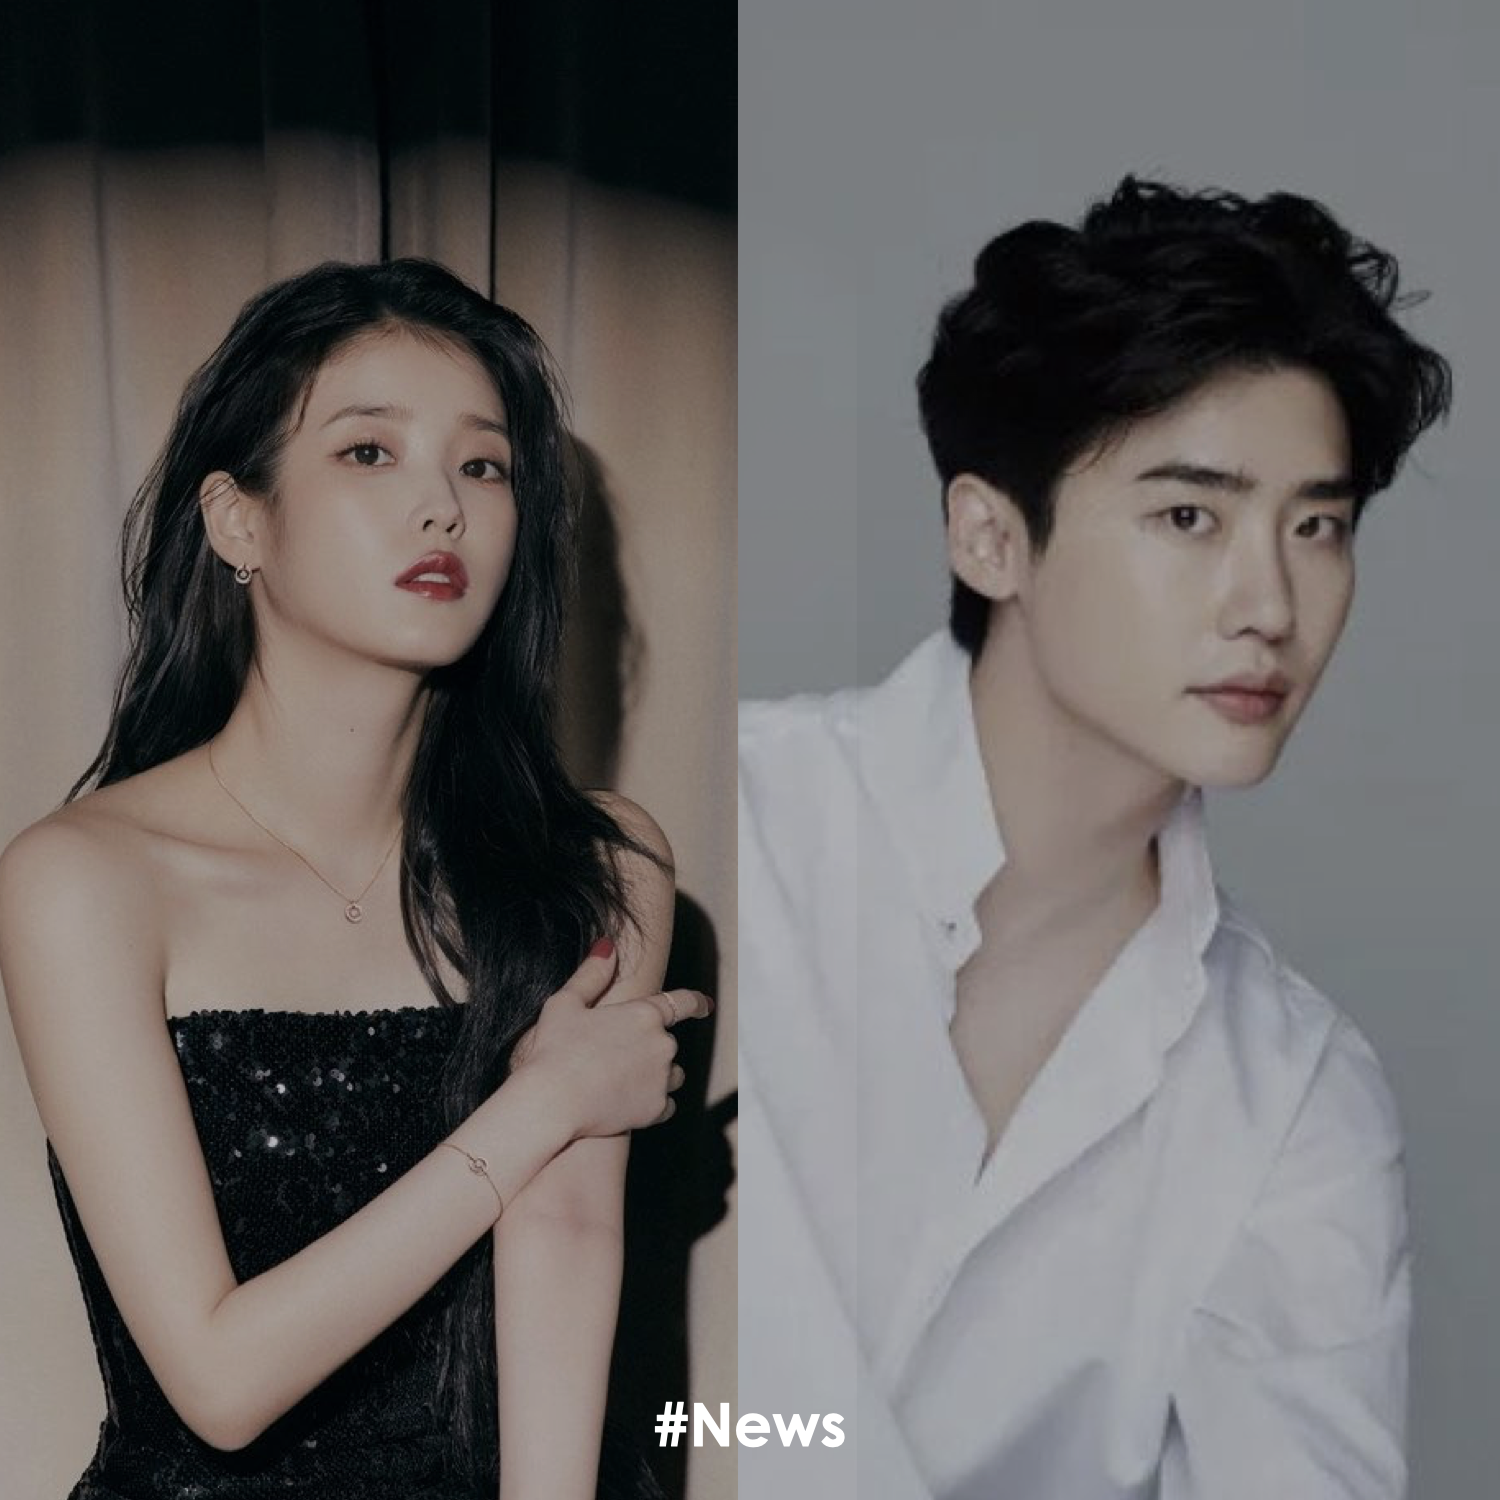 IU and Lee Jong-suk Confirmed To Be In a Relationship